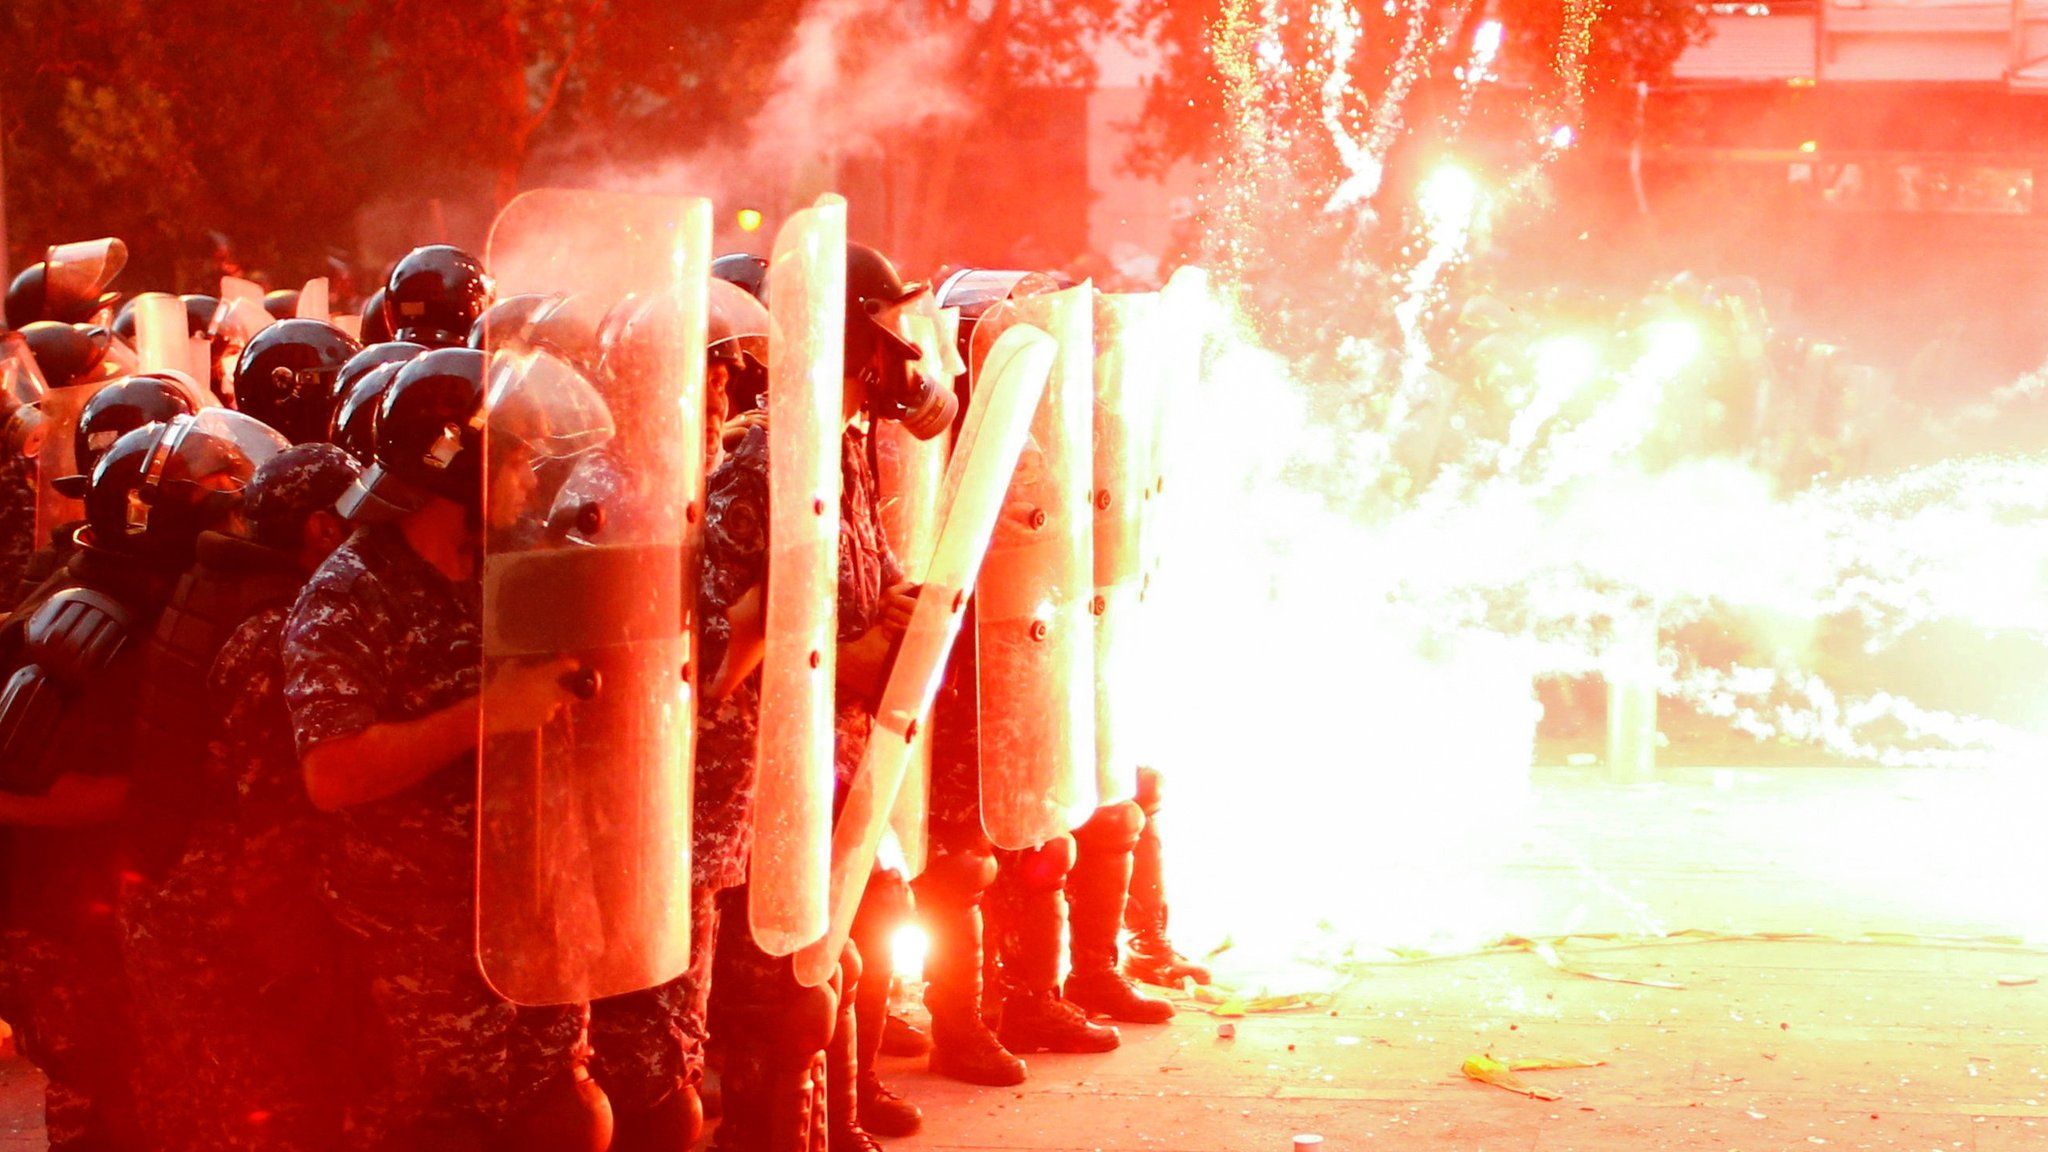 Fireworks launched by anti-government protesters hit the shields of riot police officers in Beirut on 10 August 2020